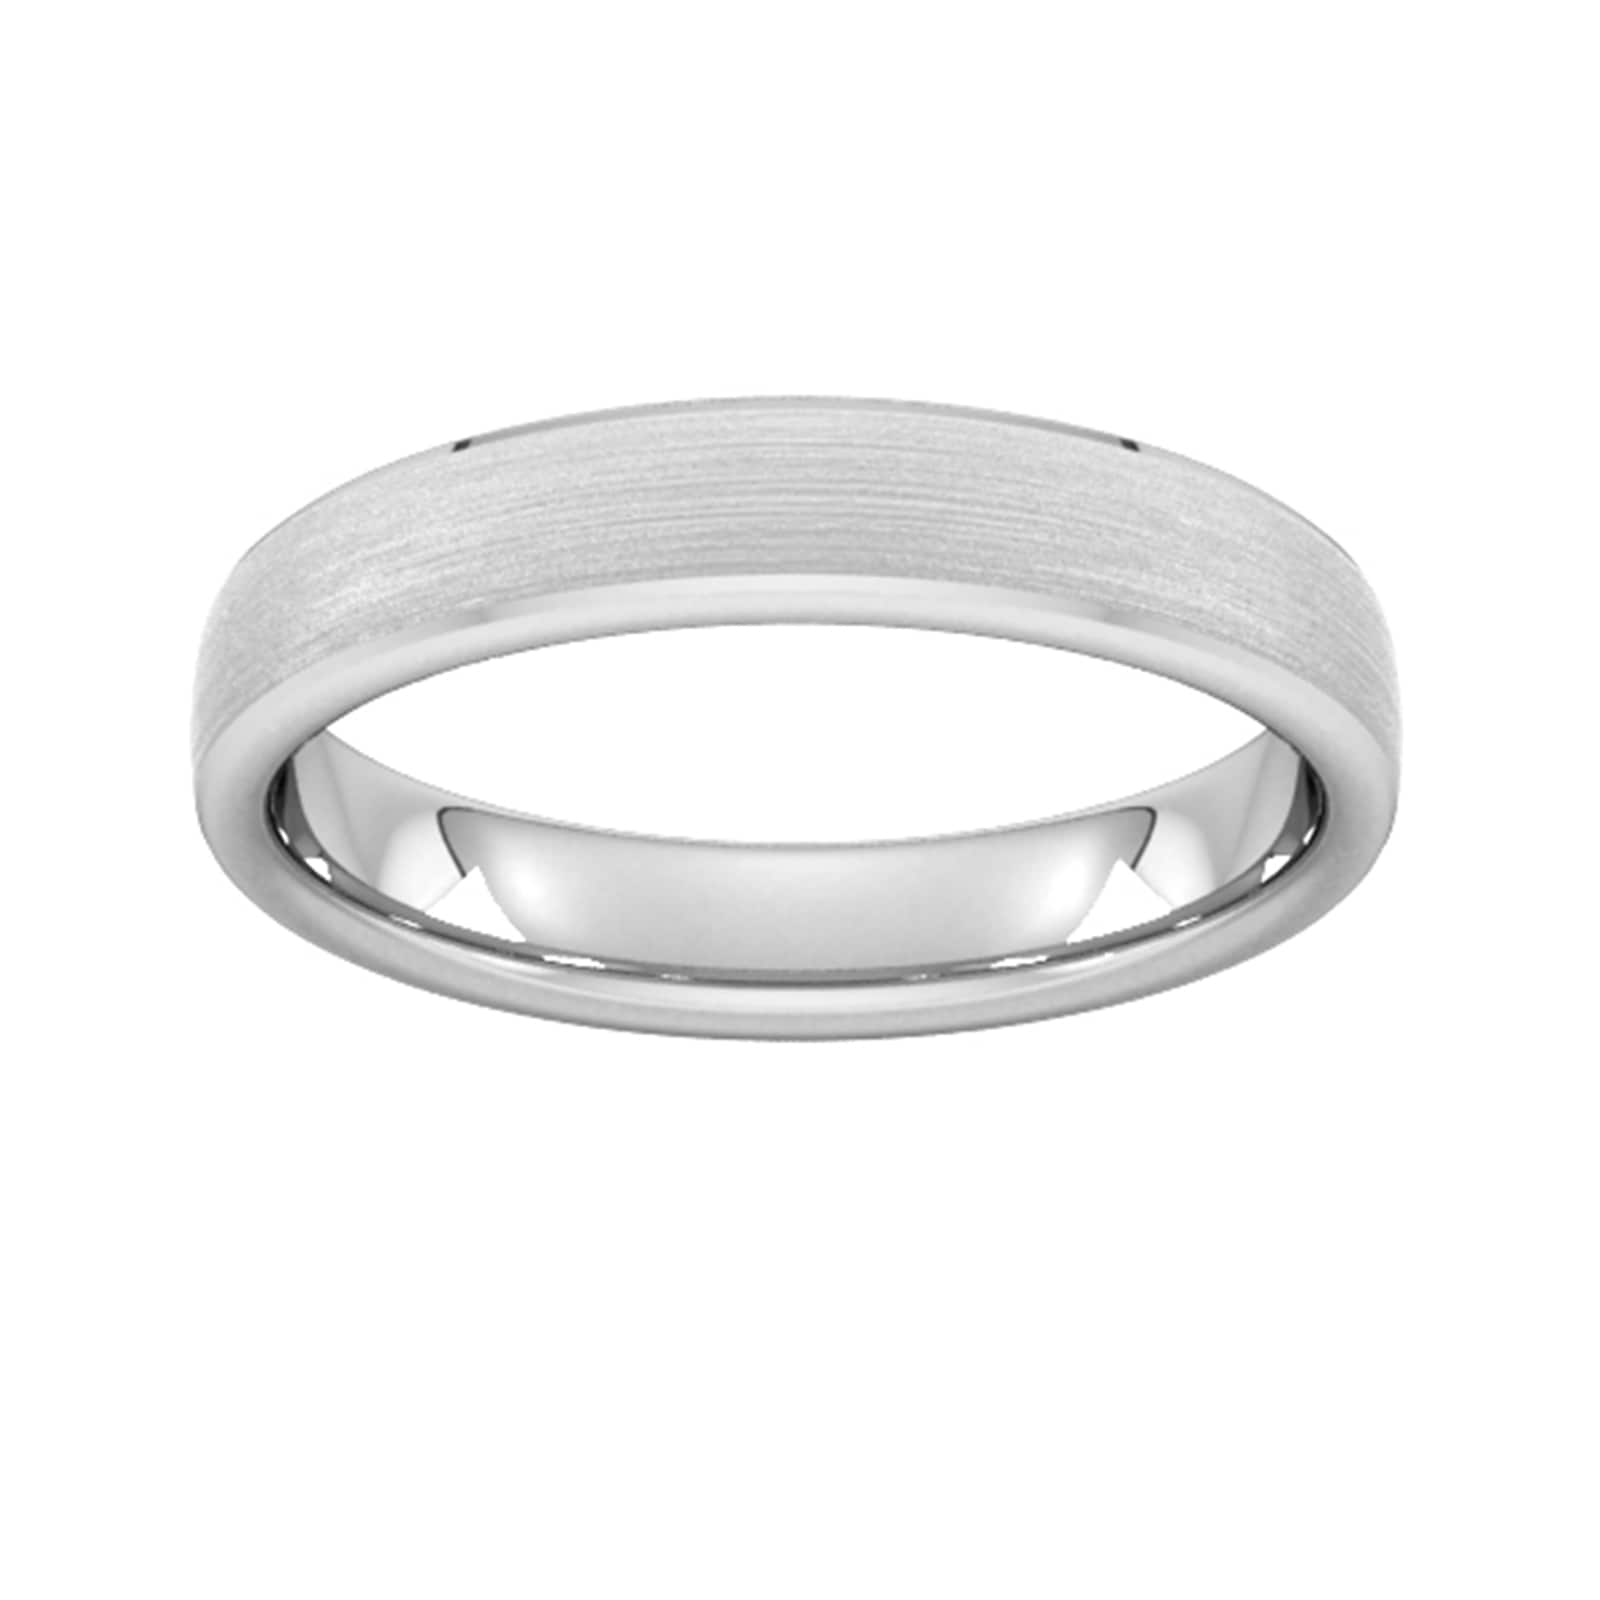 4mm Traditional Court Heavy Polished Chamfered Edges With Matt Centre Wedding Ring In 18 Carat White Gold - Ring Size R